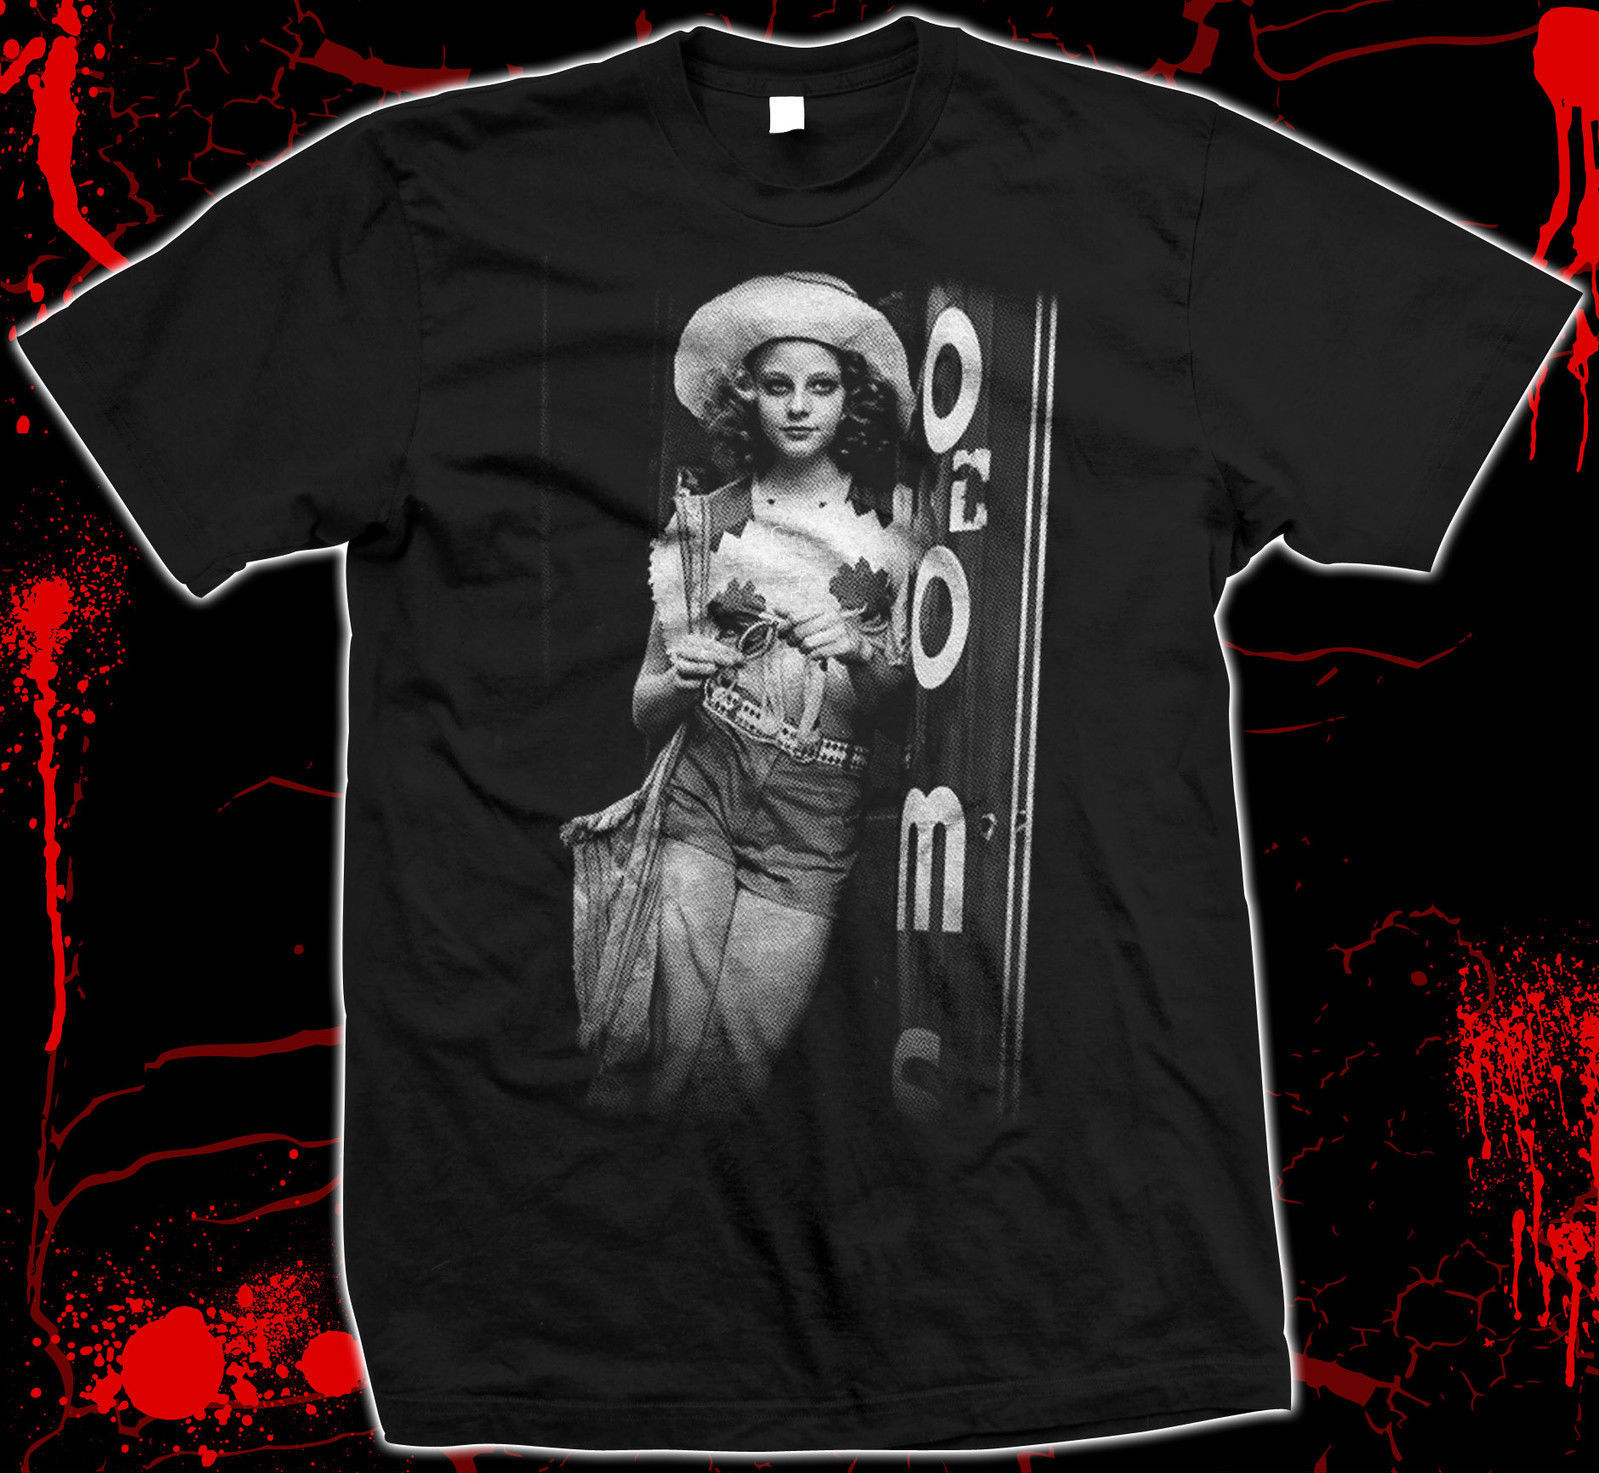 Jodie Foster - Taxi Driver - Pre-shrunk, hand screened 100% cotton t-shirt